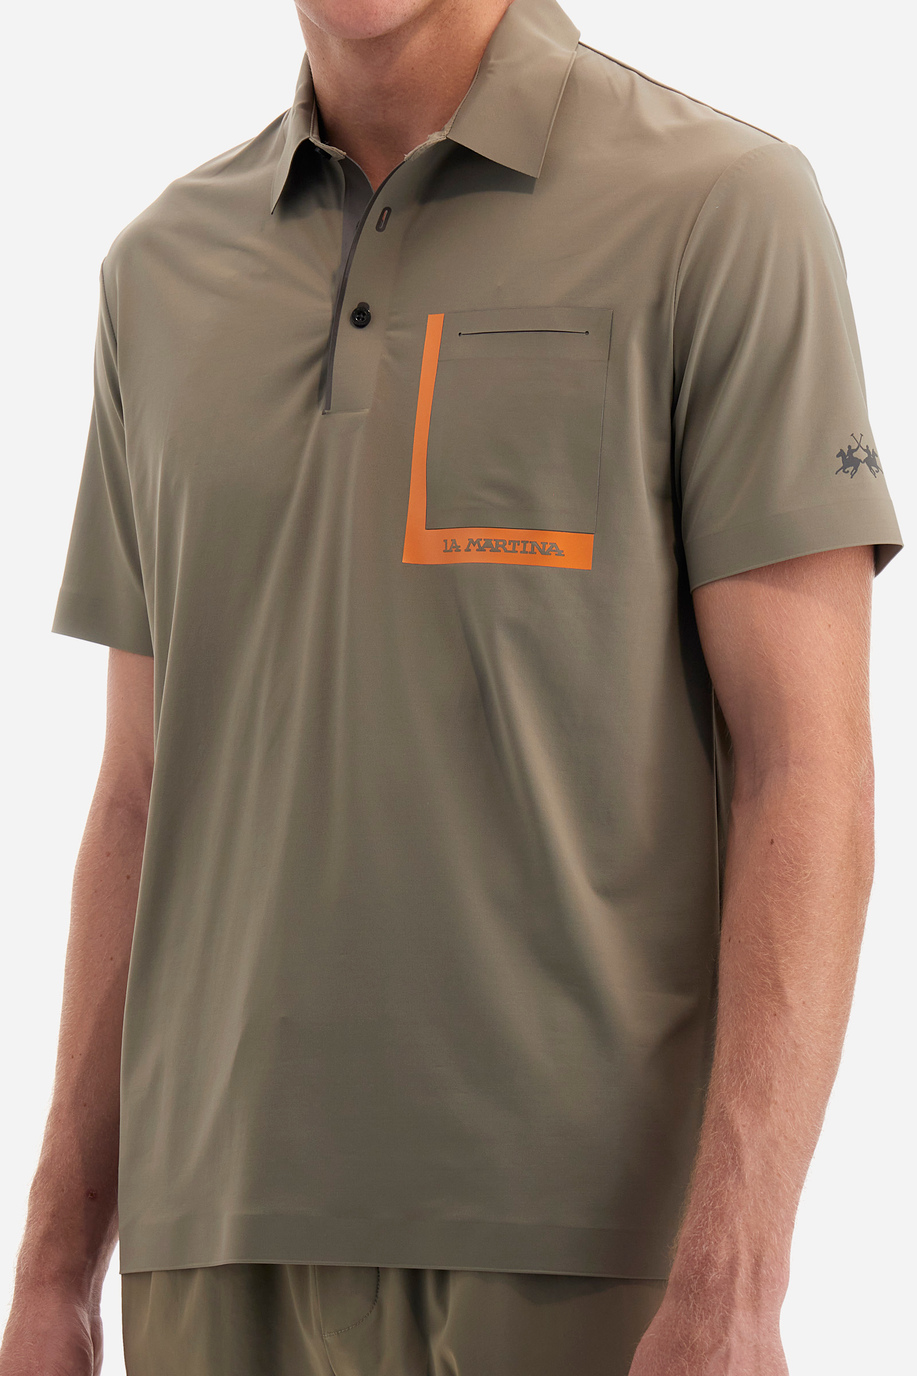 Regular-fit polo shirt in synthetic fabric - Yorik - Spring looks for him | La Martina - Official Online Shop